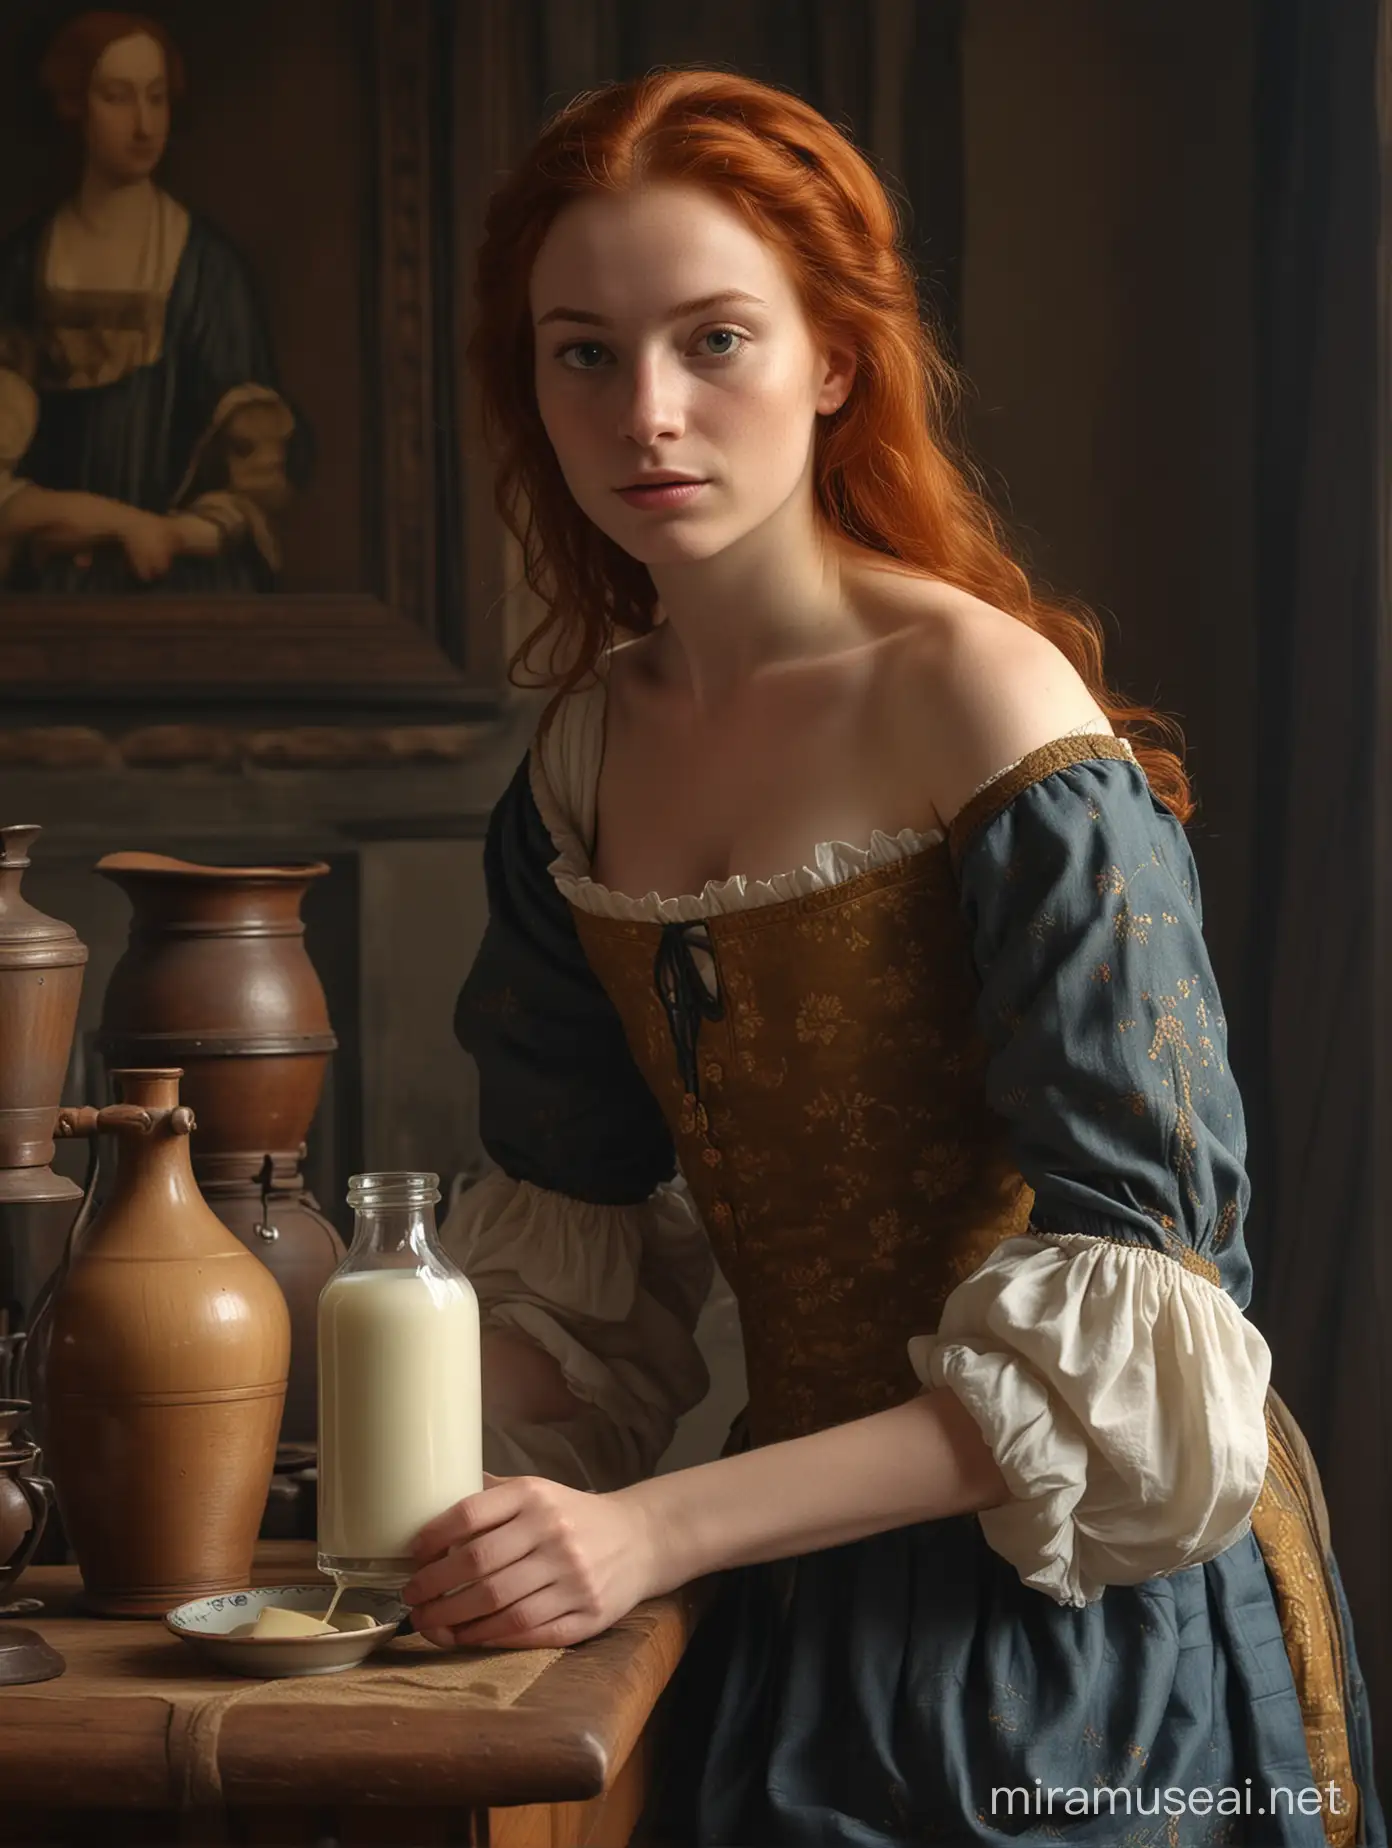 Sensual RedHaired Woman Posing as Vermeers Milkmaid in Authentic 17th Century Dutch Scene